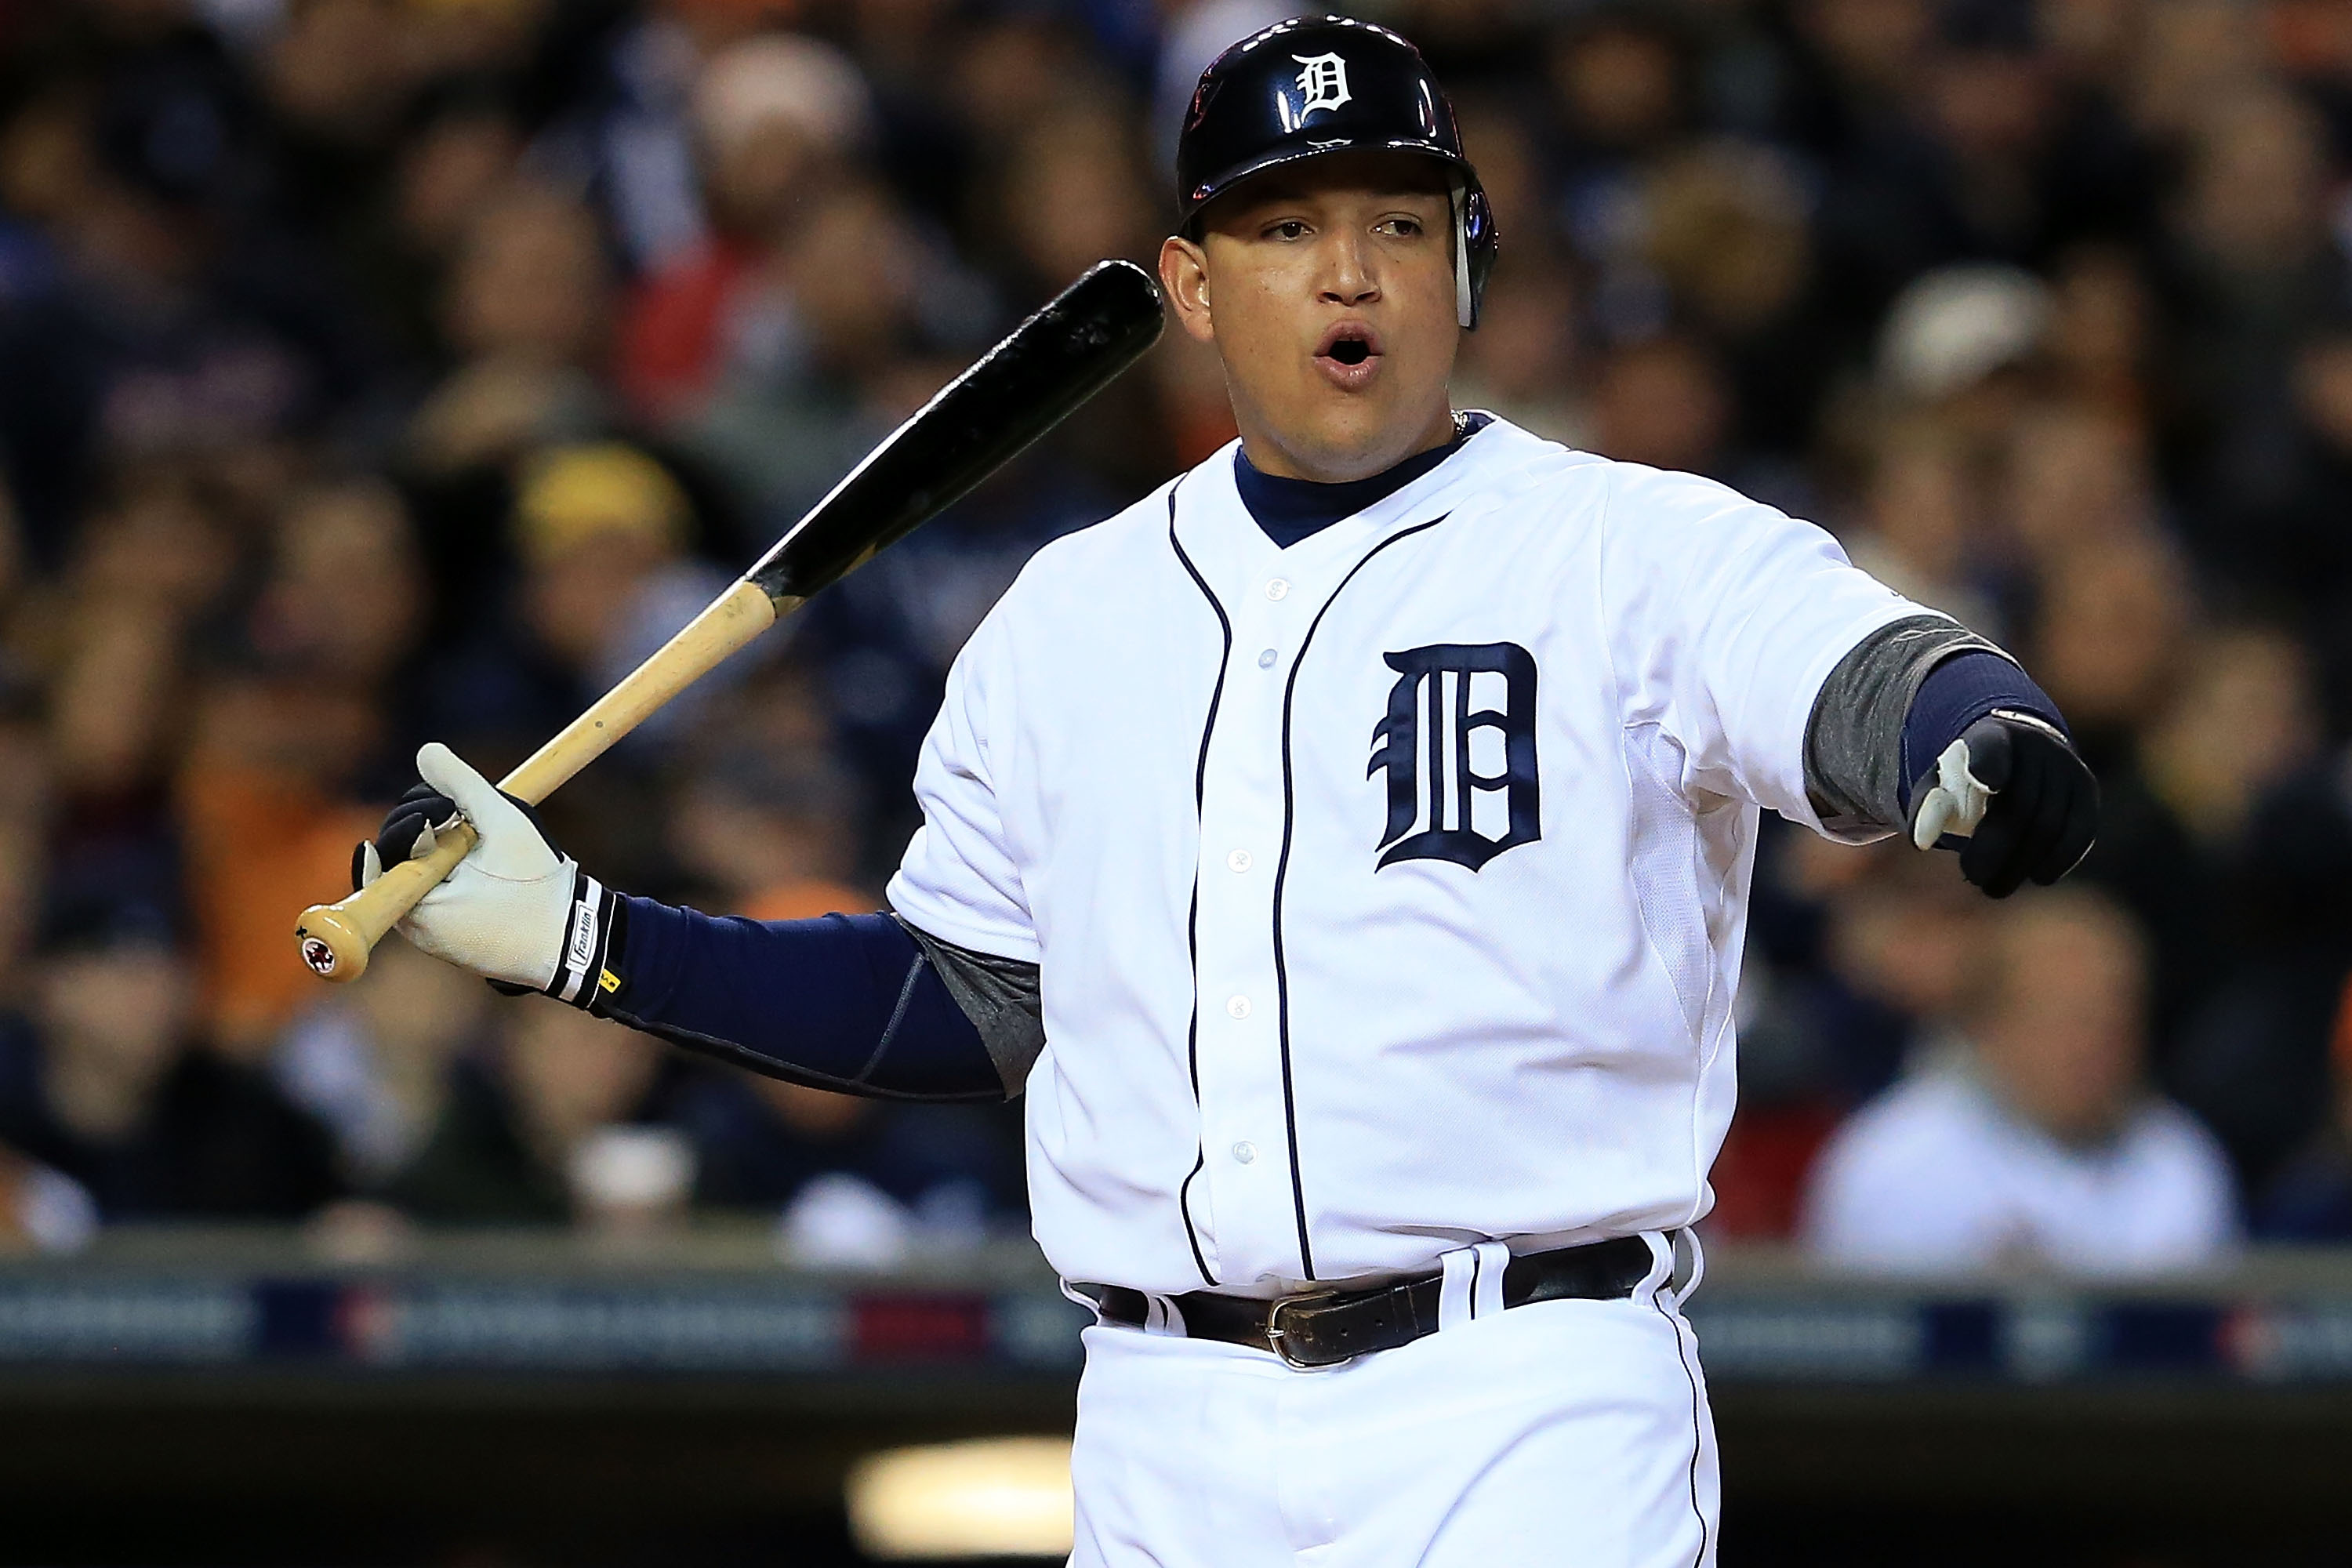 Mike Trout vs. Miguel Cabrera: Revisiting the 2012 American League